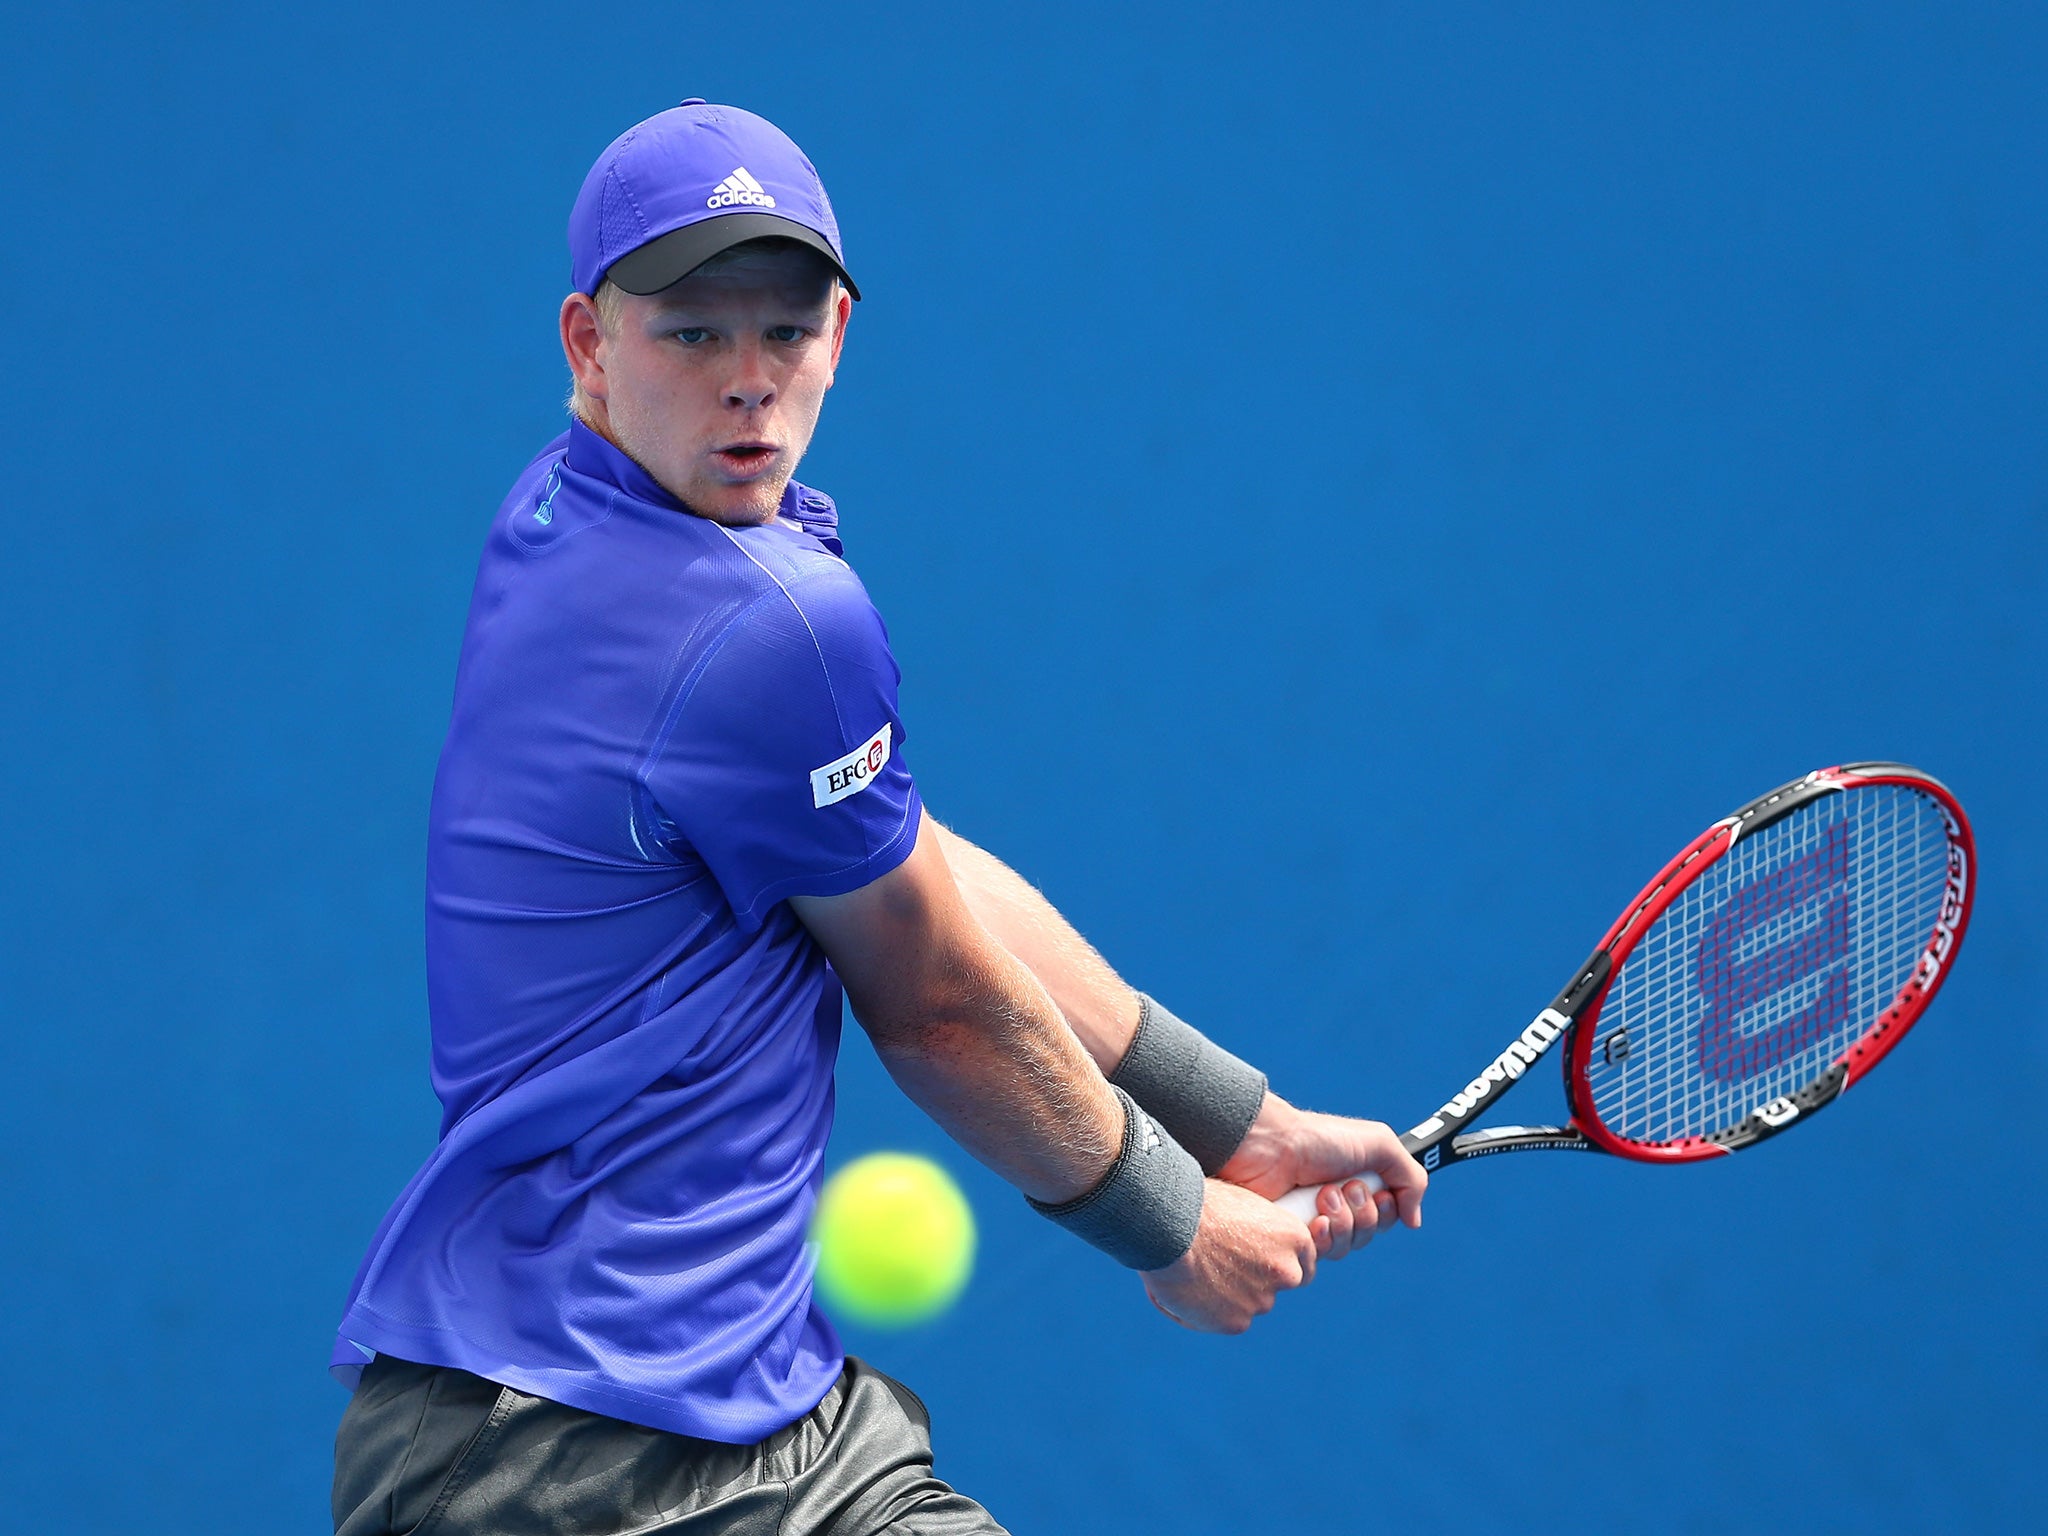 Edmund has already cleared his first hurdle at Roland Garros by beating Austria’s Gerald Melze